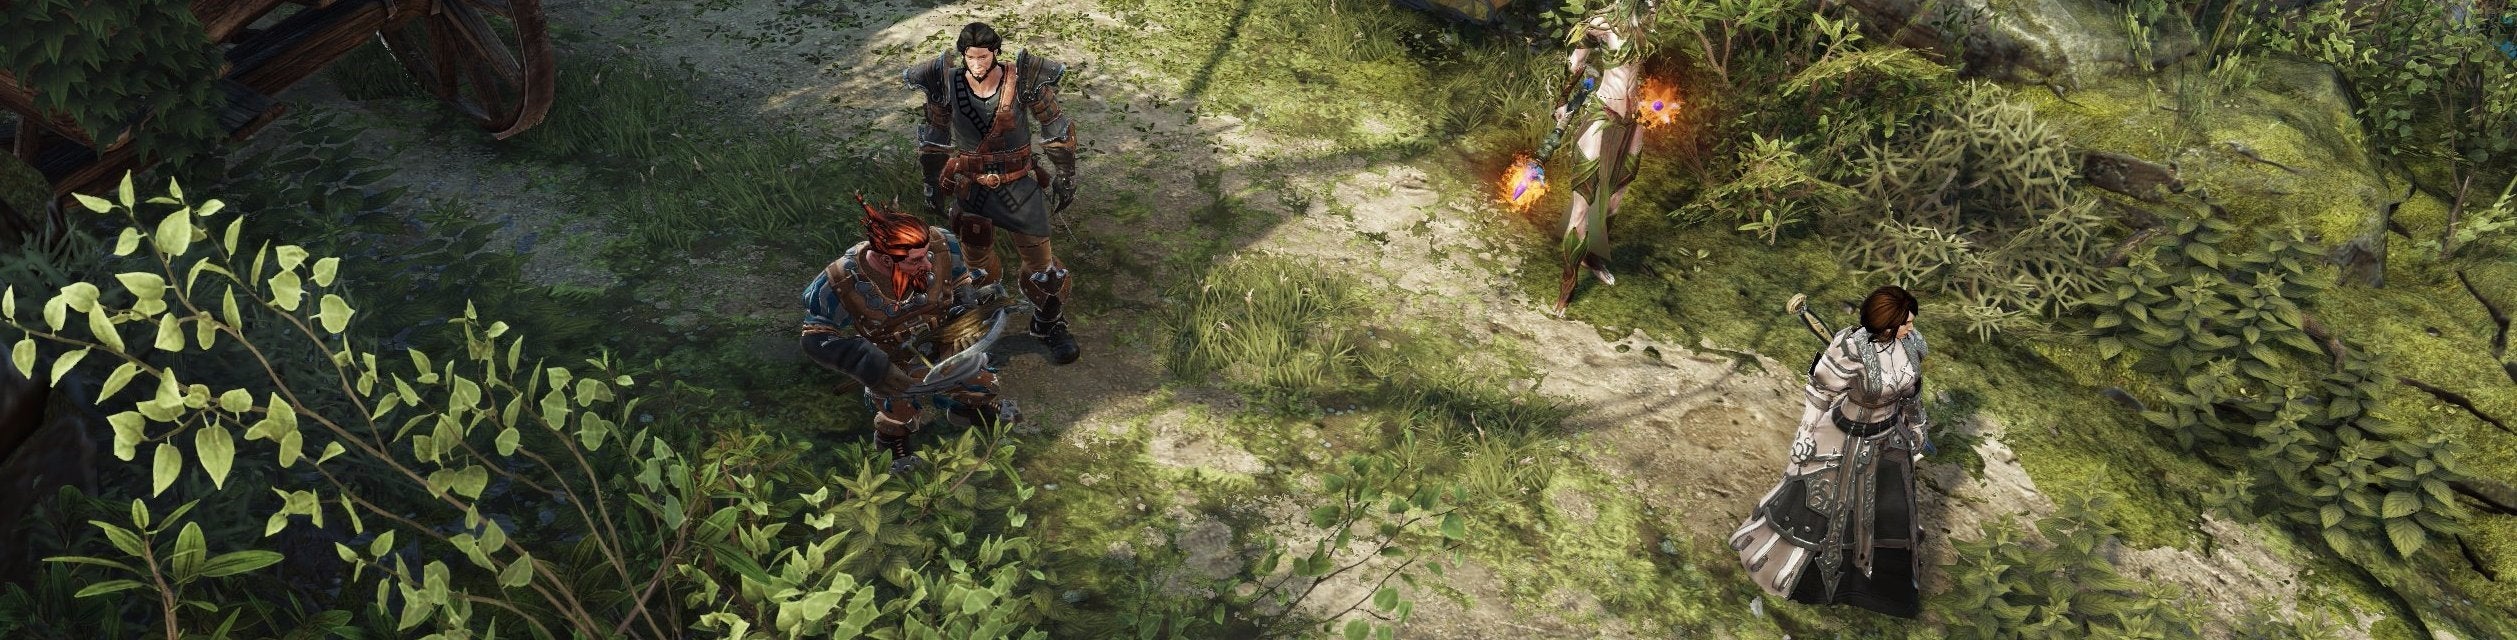 Image for Divinity: Original Sin 2's narrative is fuelled by dizzying, twisted multiplayer